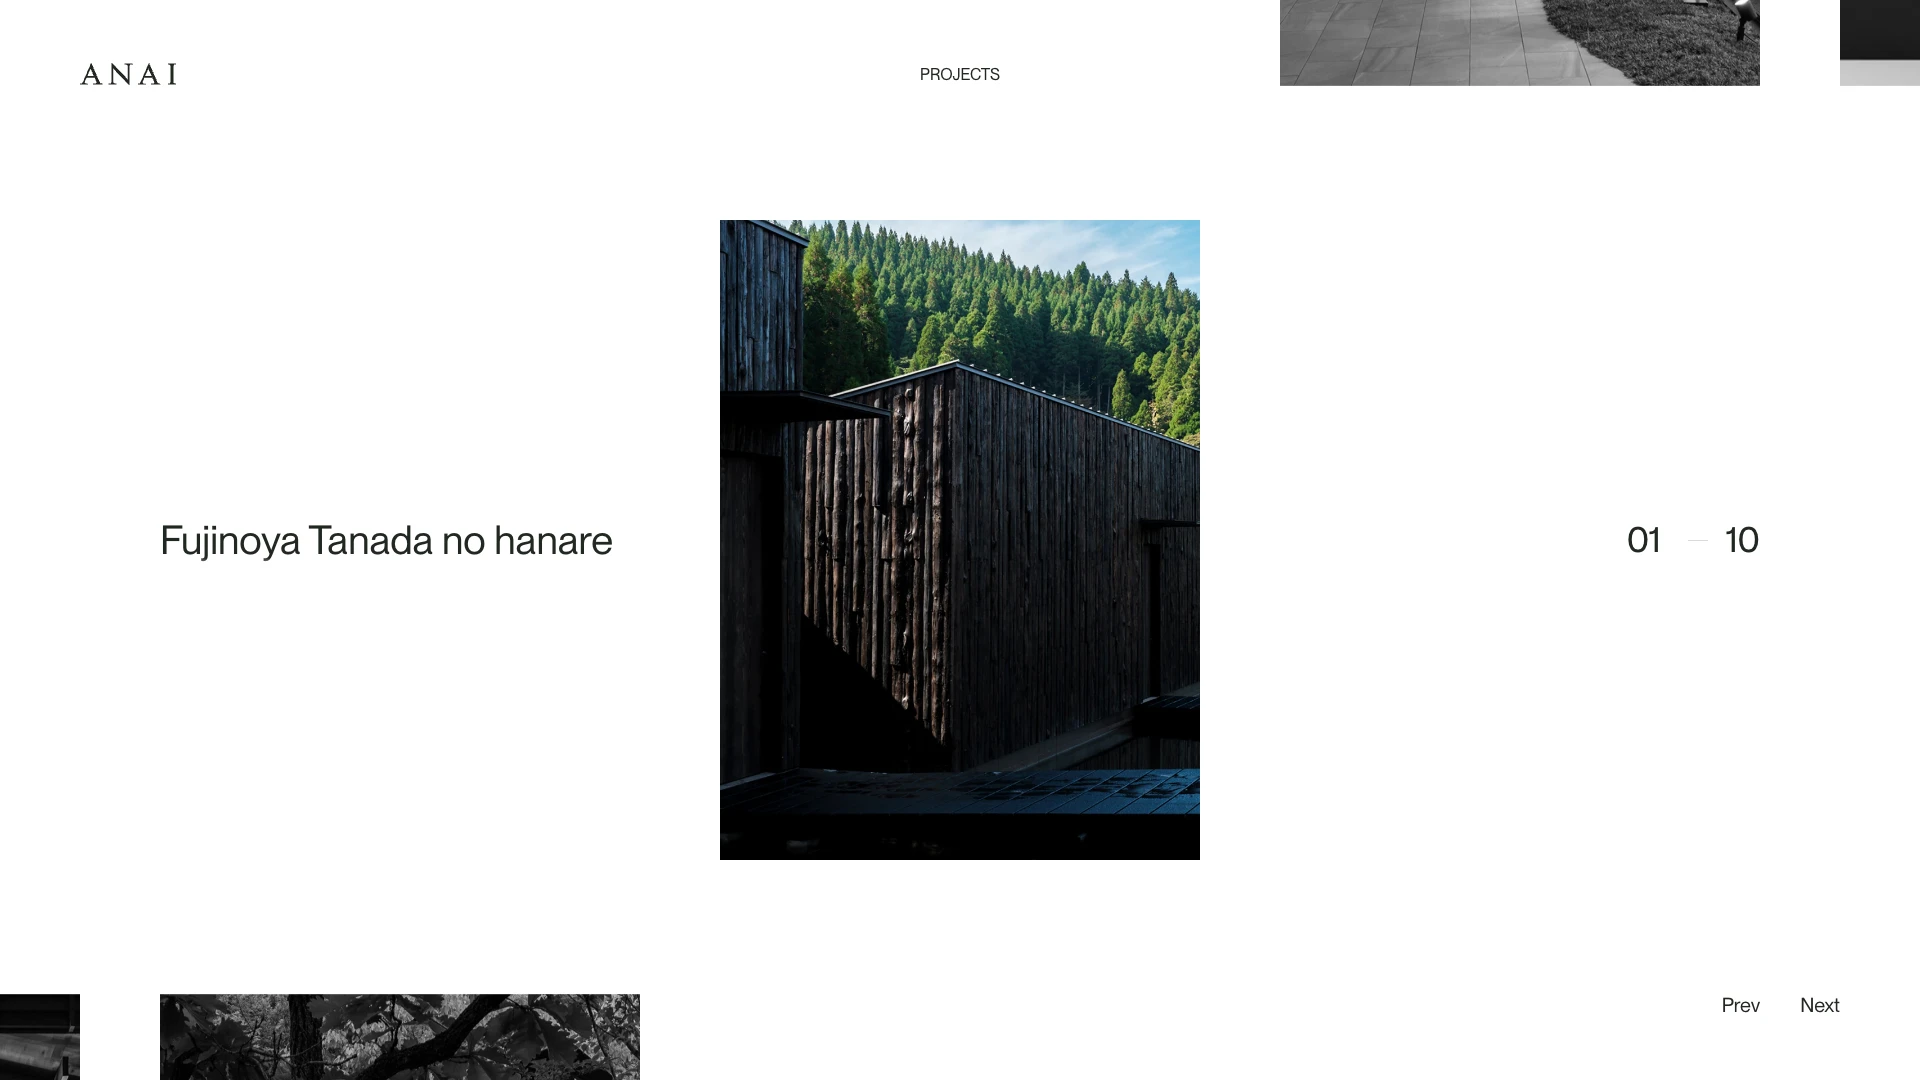 ANAI Landing Page Example: Establishing the relationship between Forests and Architecture.